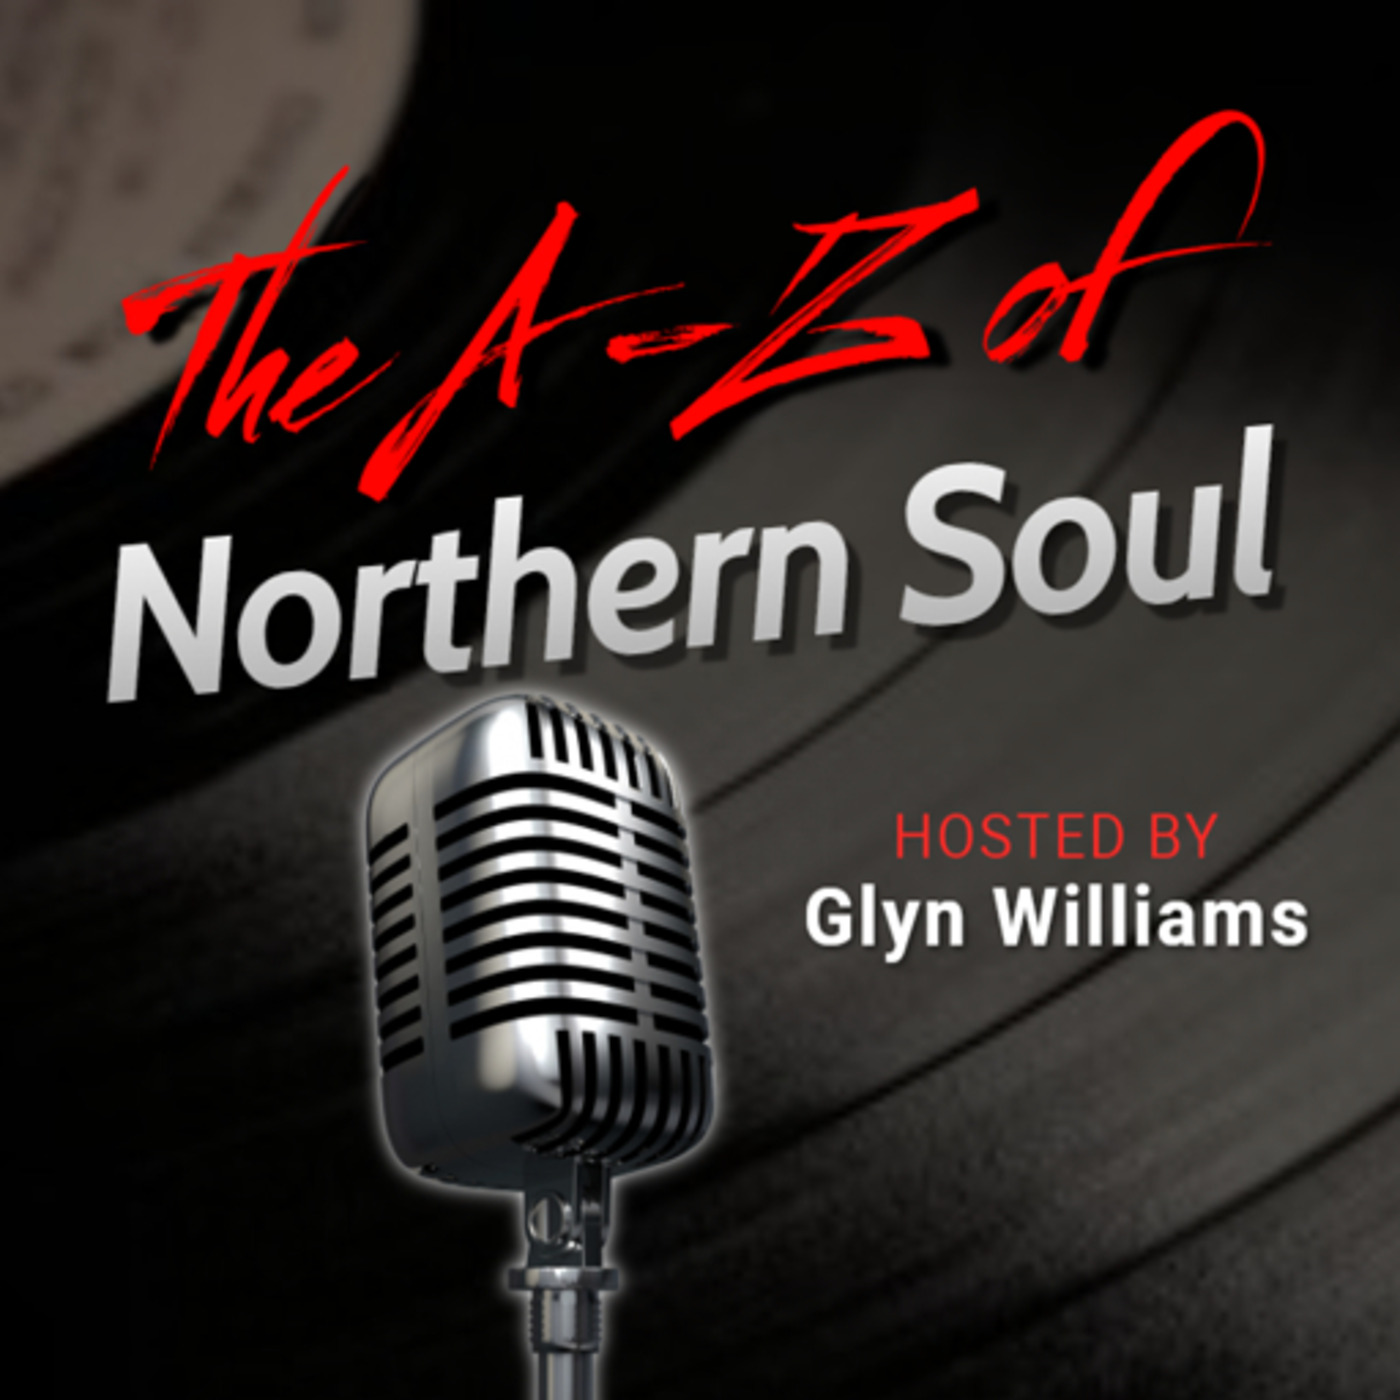 The A-Z of Northern Soul E016